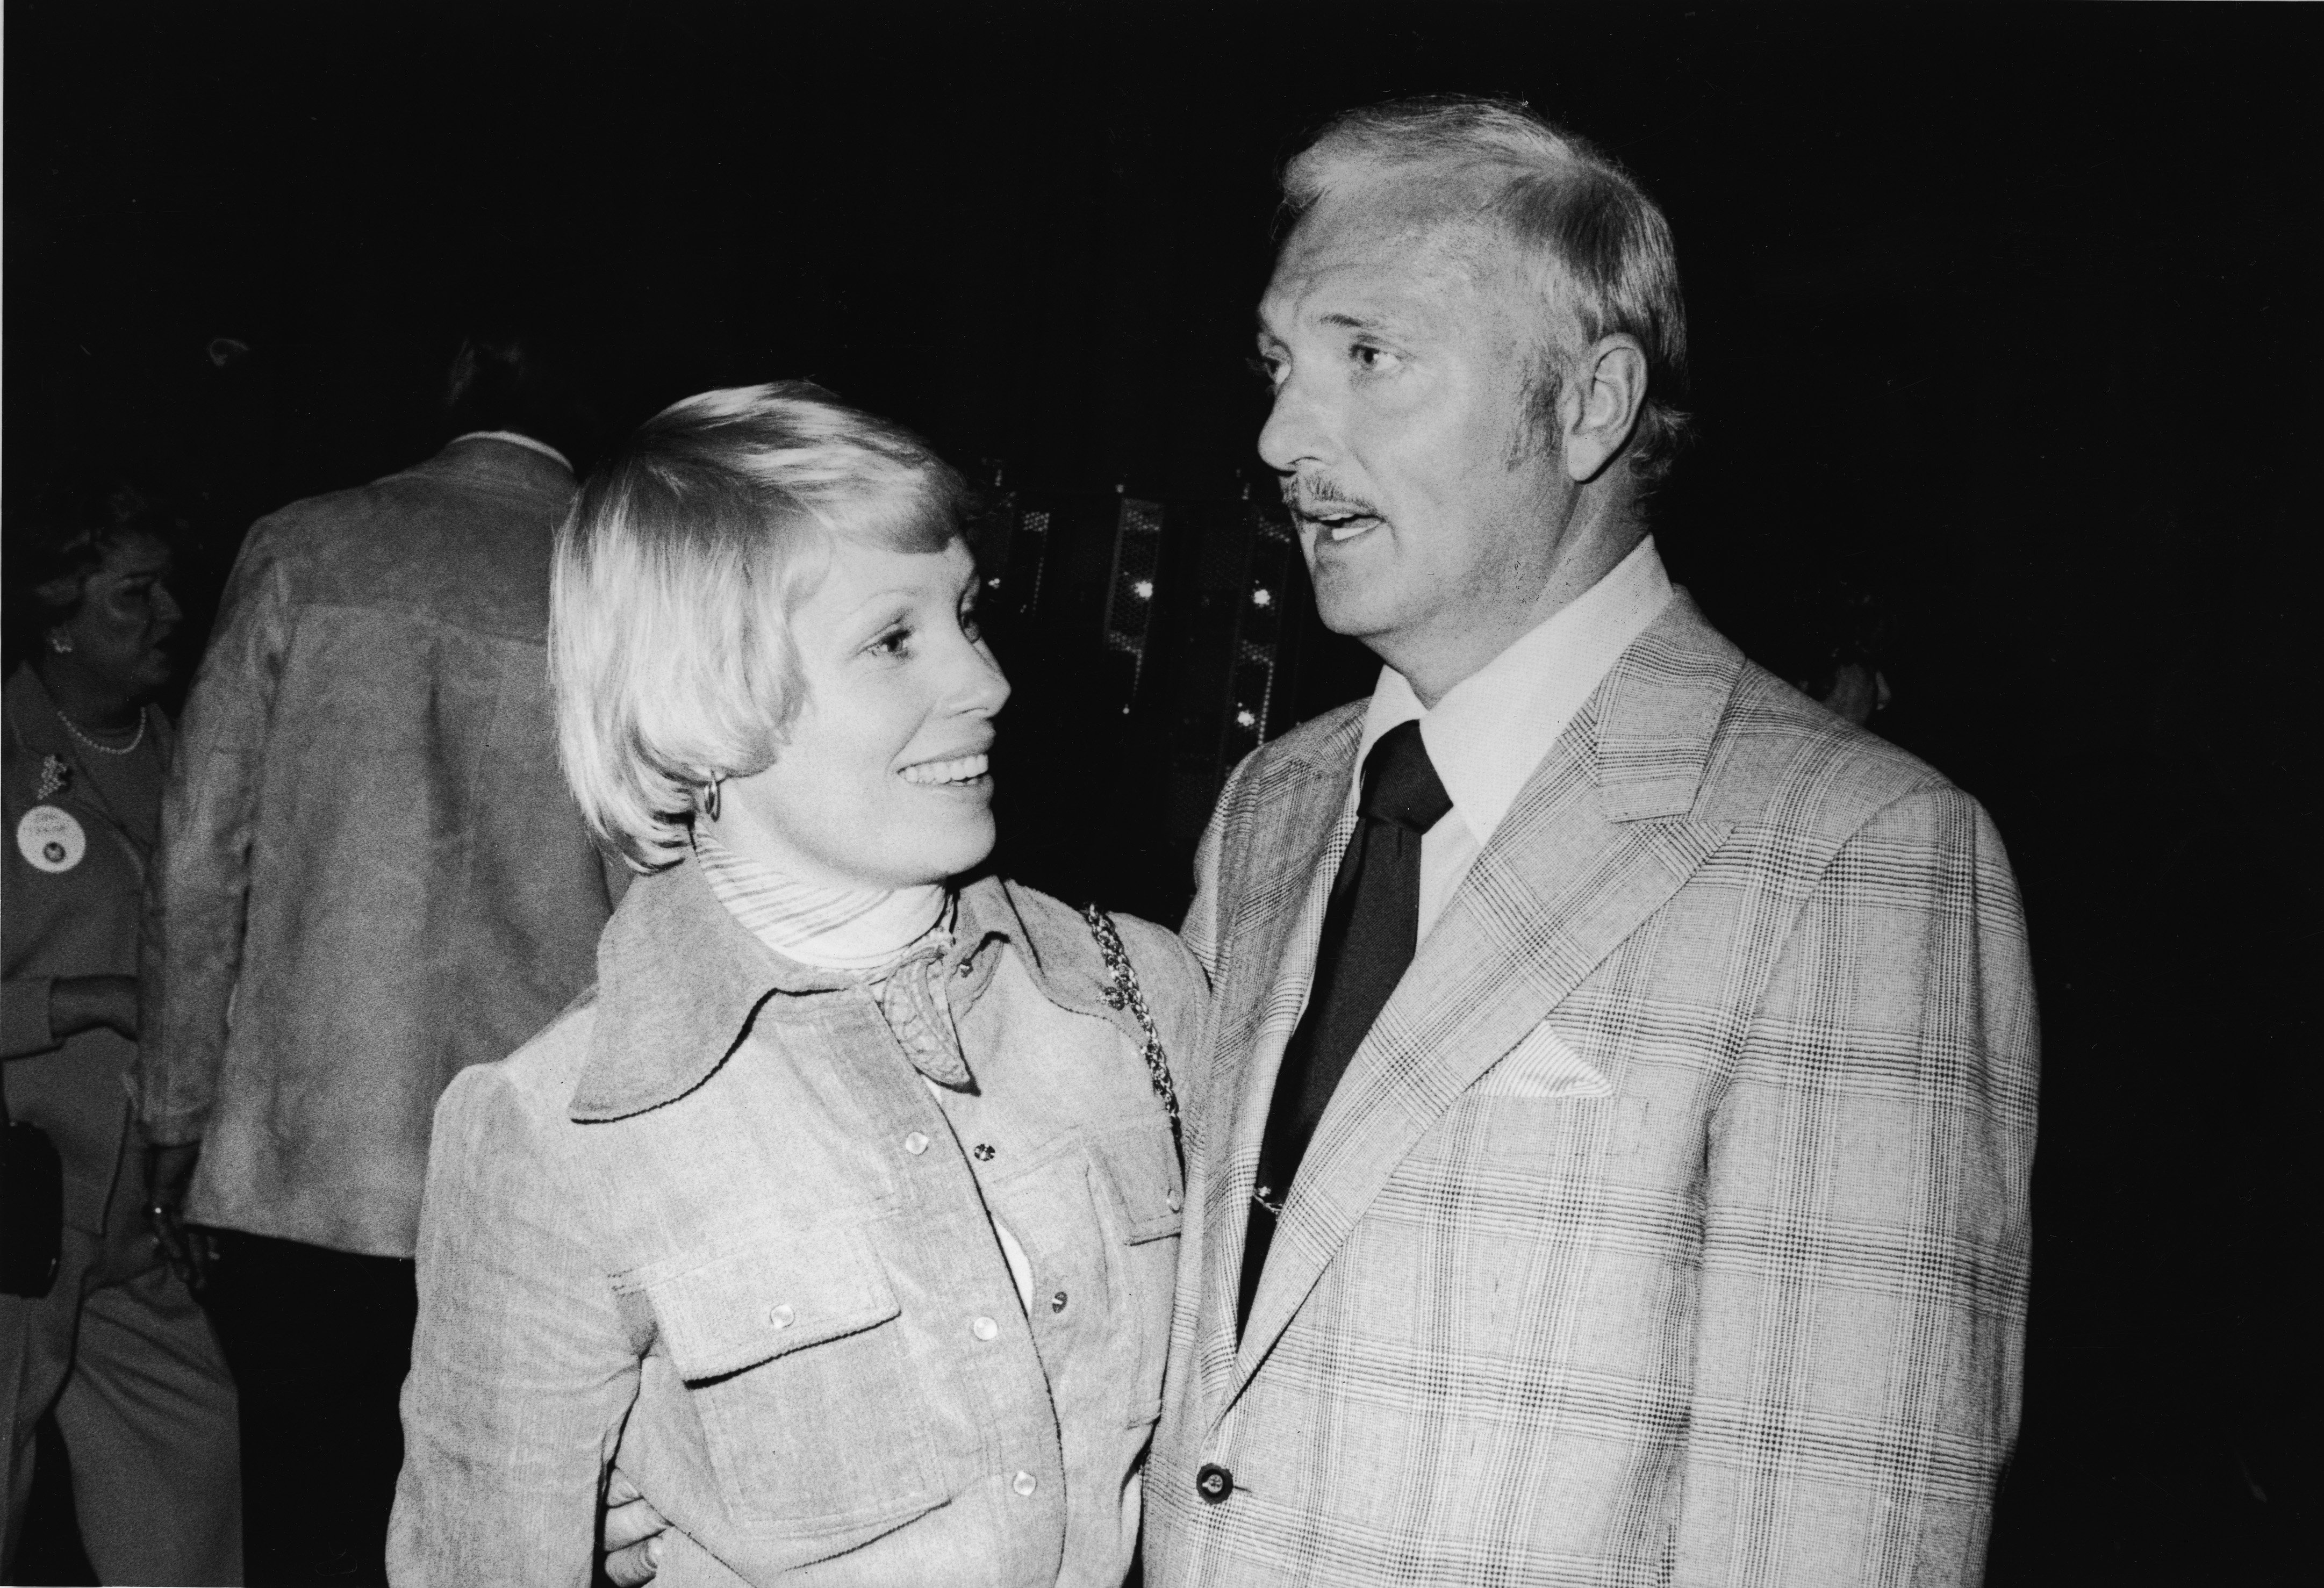  Joyce Bulifant and Jack Cassidy attend the opening of the Motorama Museum, 1975, Hollywood, California. | Photo: Getty Images